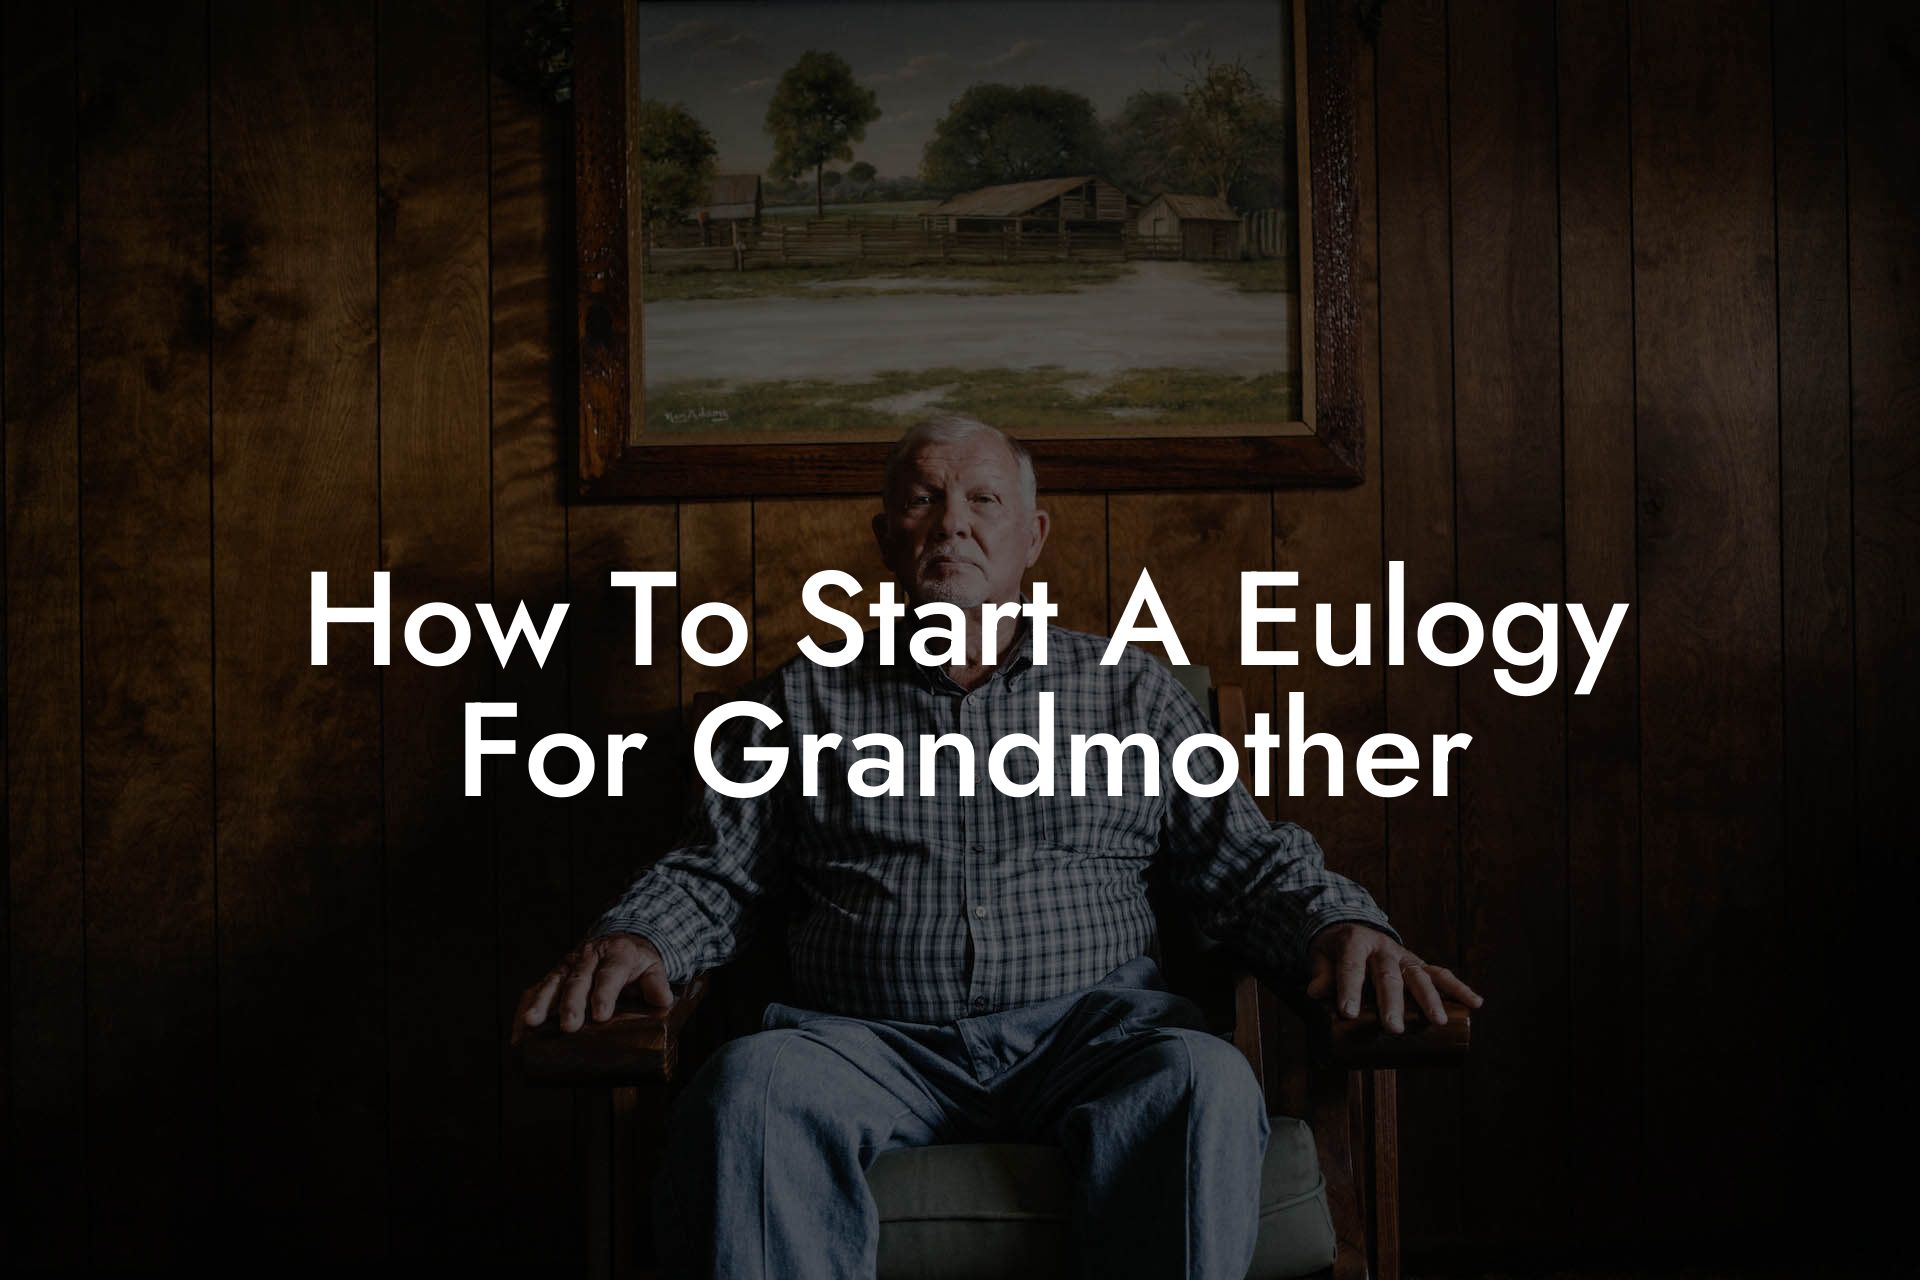 How To Start A Eulogy For Grandmother